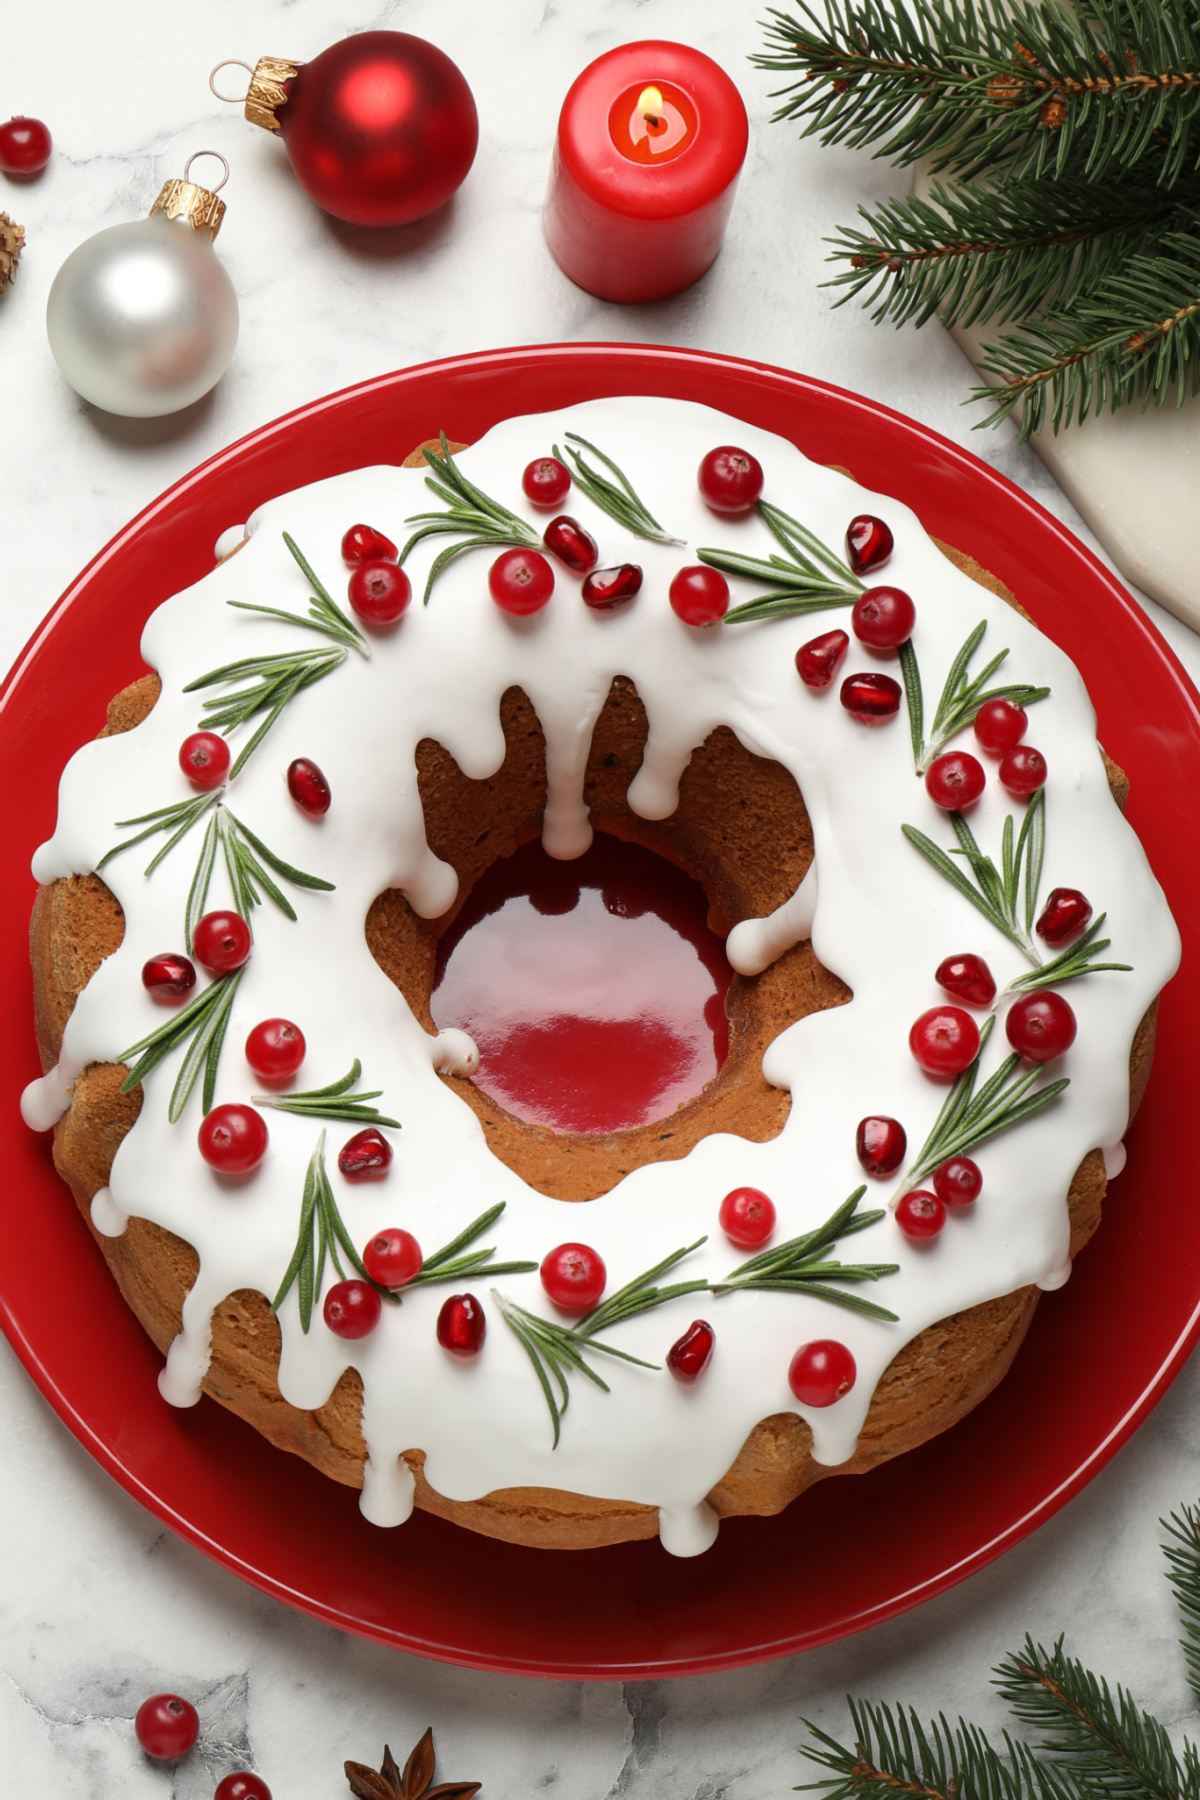 A christmas cake with icing and berries on a red plate.